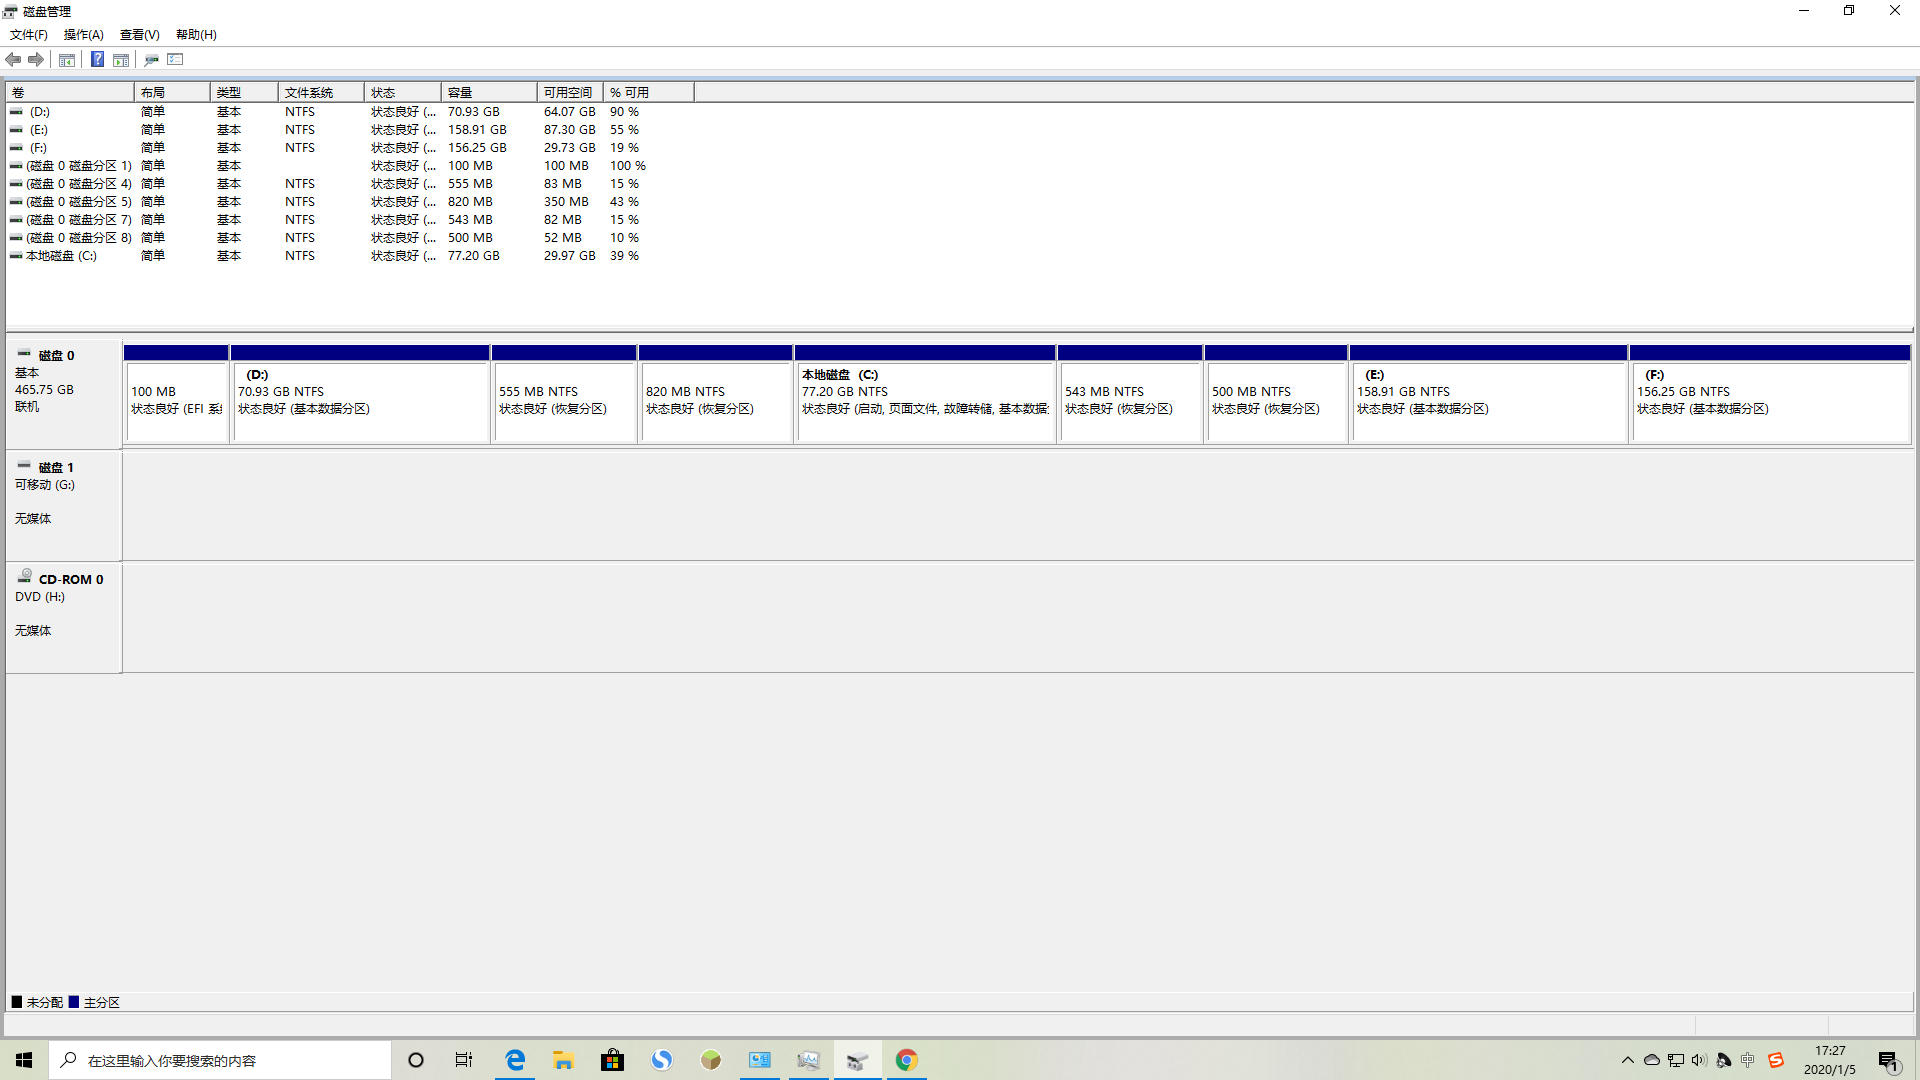 Multiple Windows Recovery Partitions 12a6210e-1e7b-401f-ab3d-7bb4d47422b0?upload=true.png